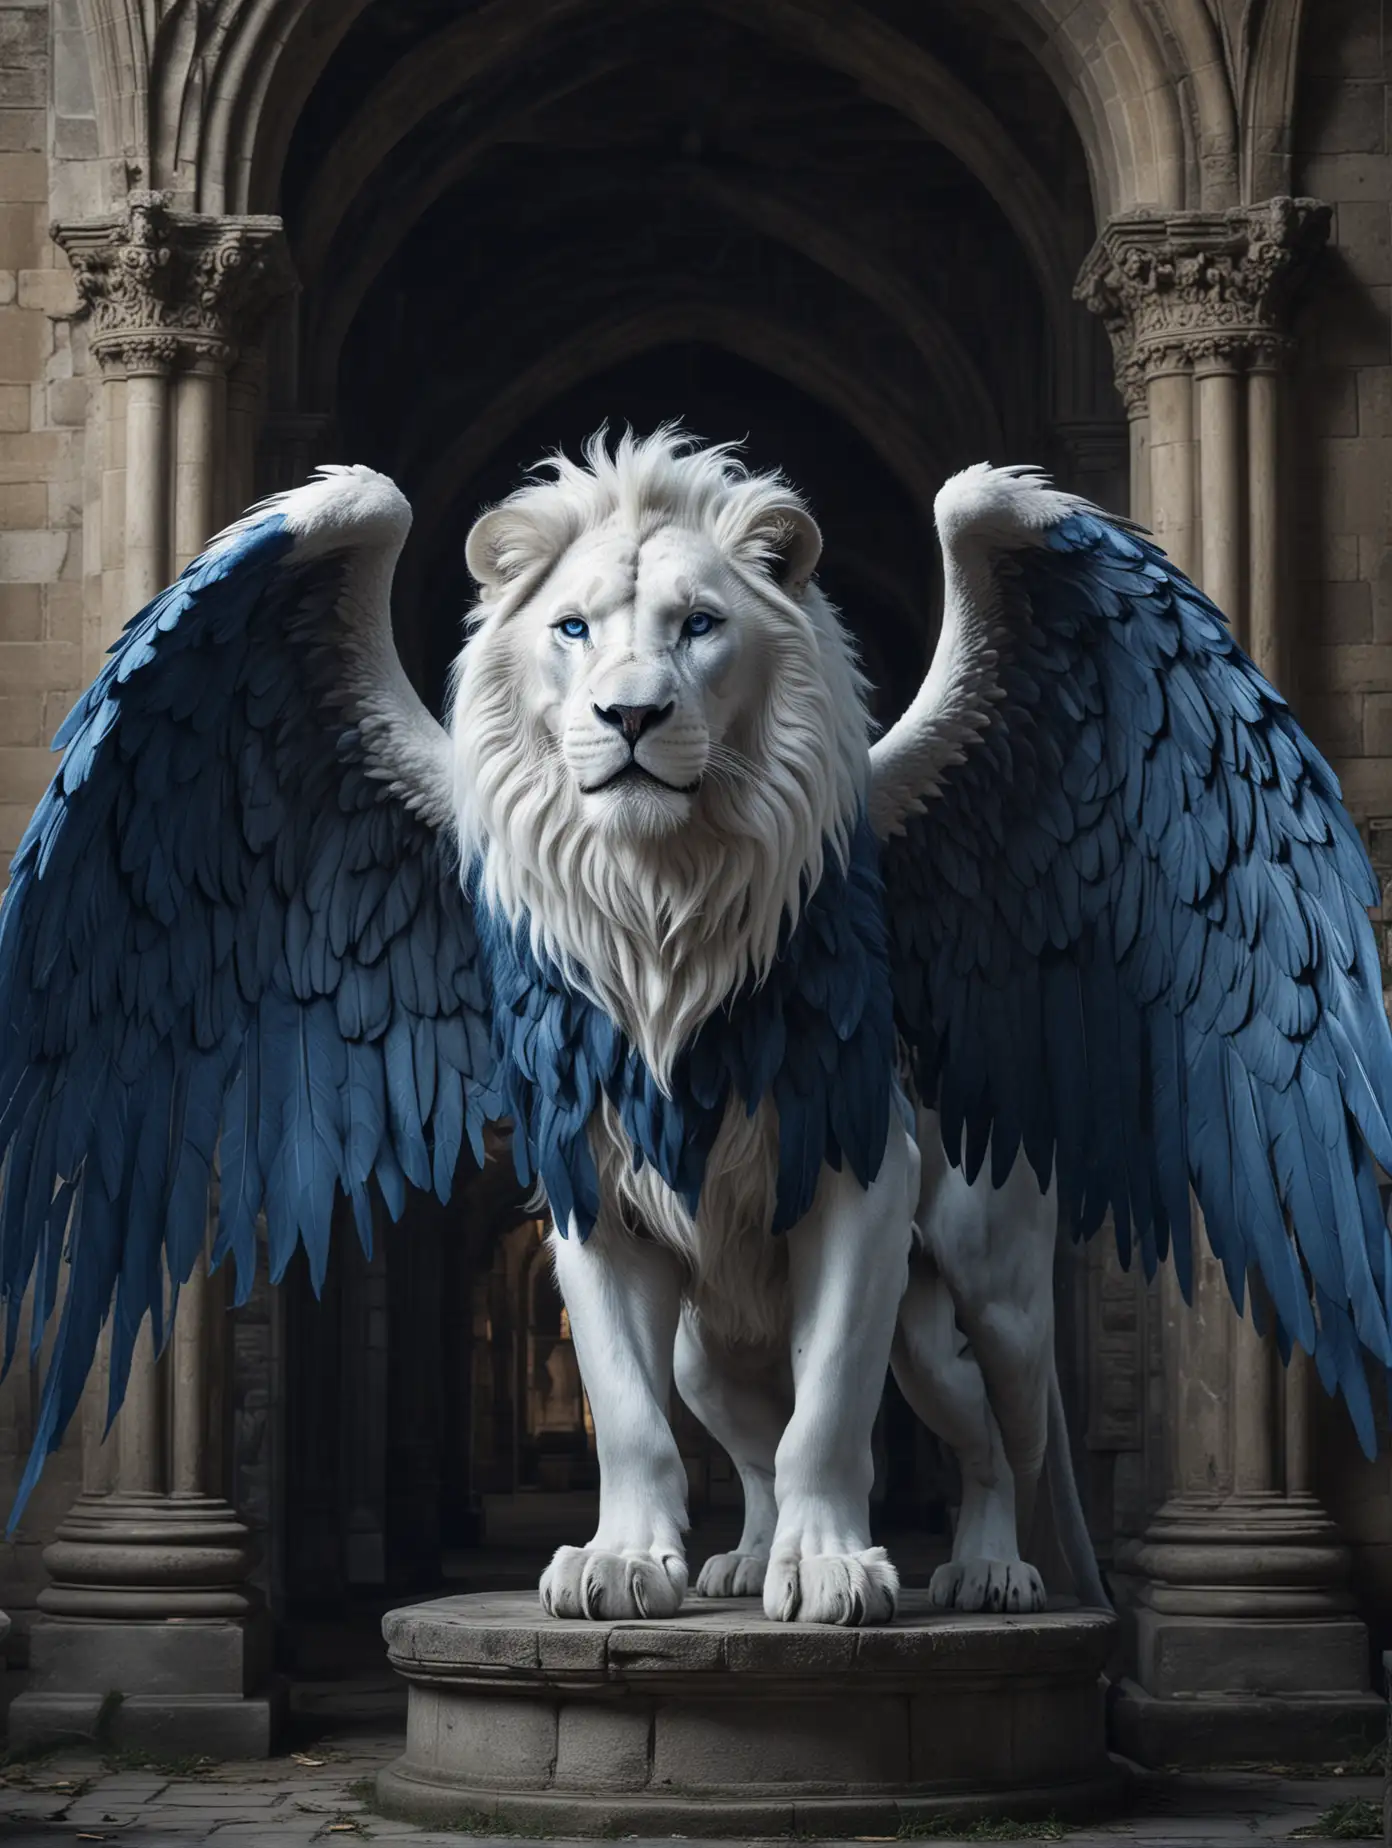 Majestic Winged Lion in a Gothic Castle under a Magical Dark Blue Sky